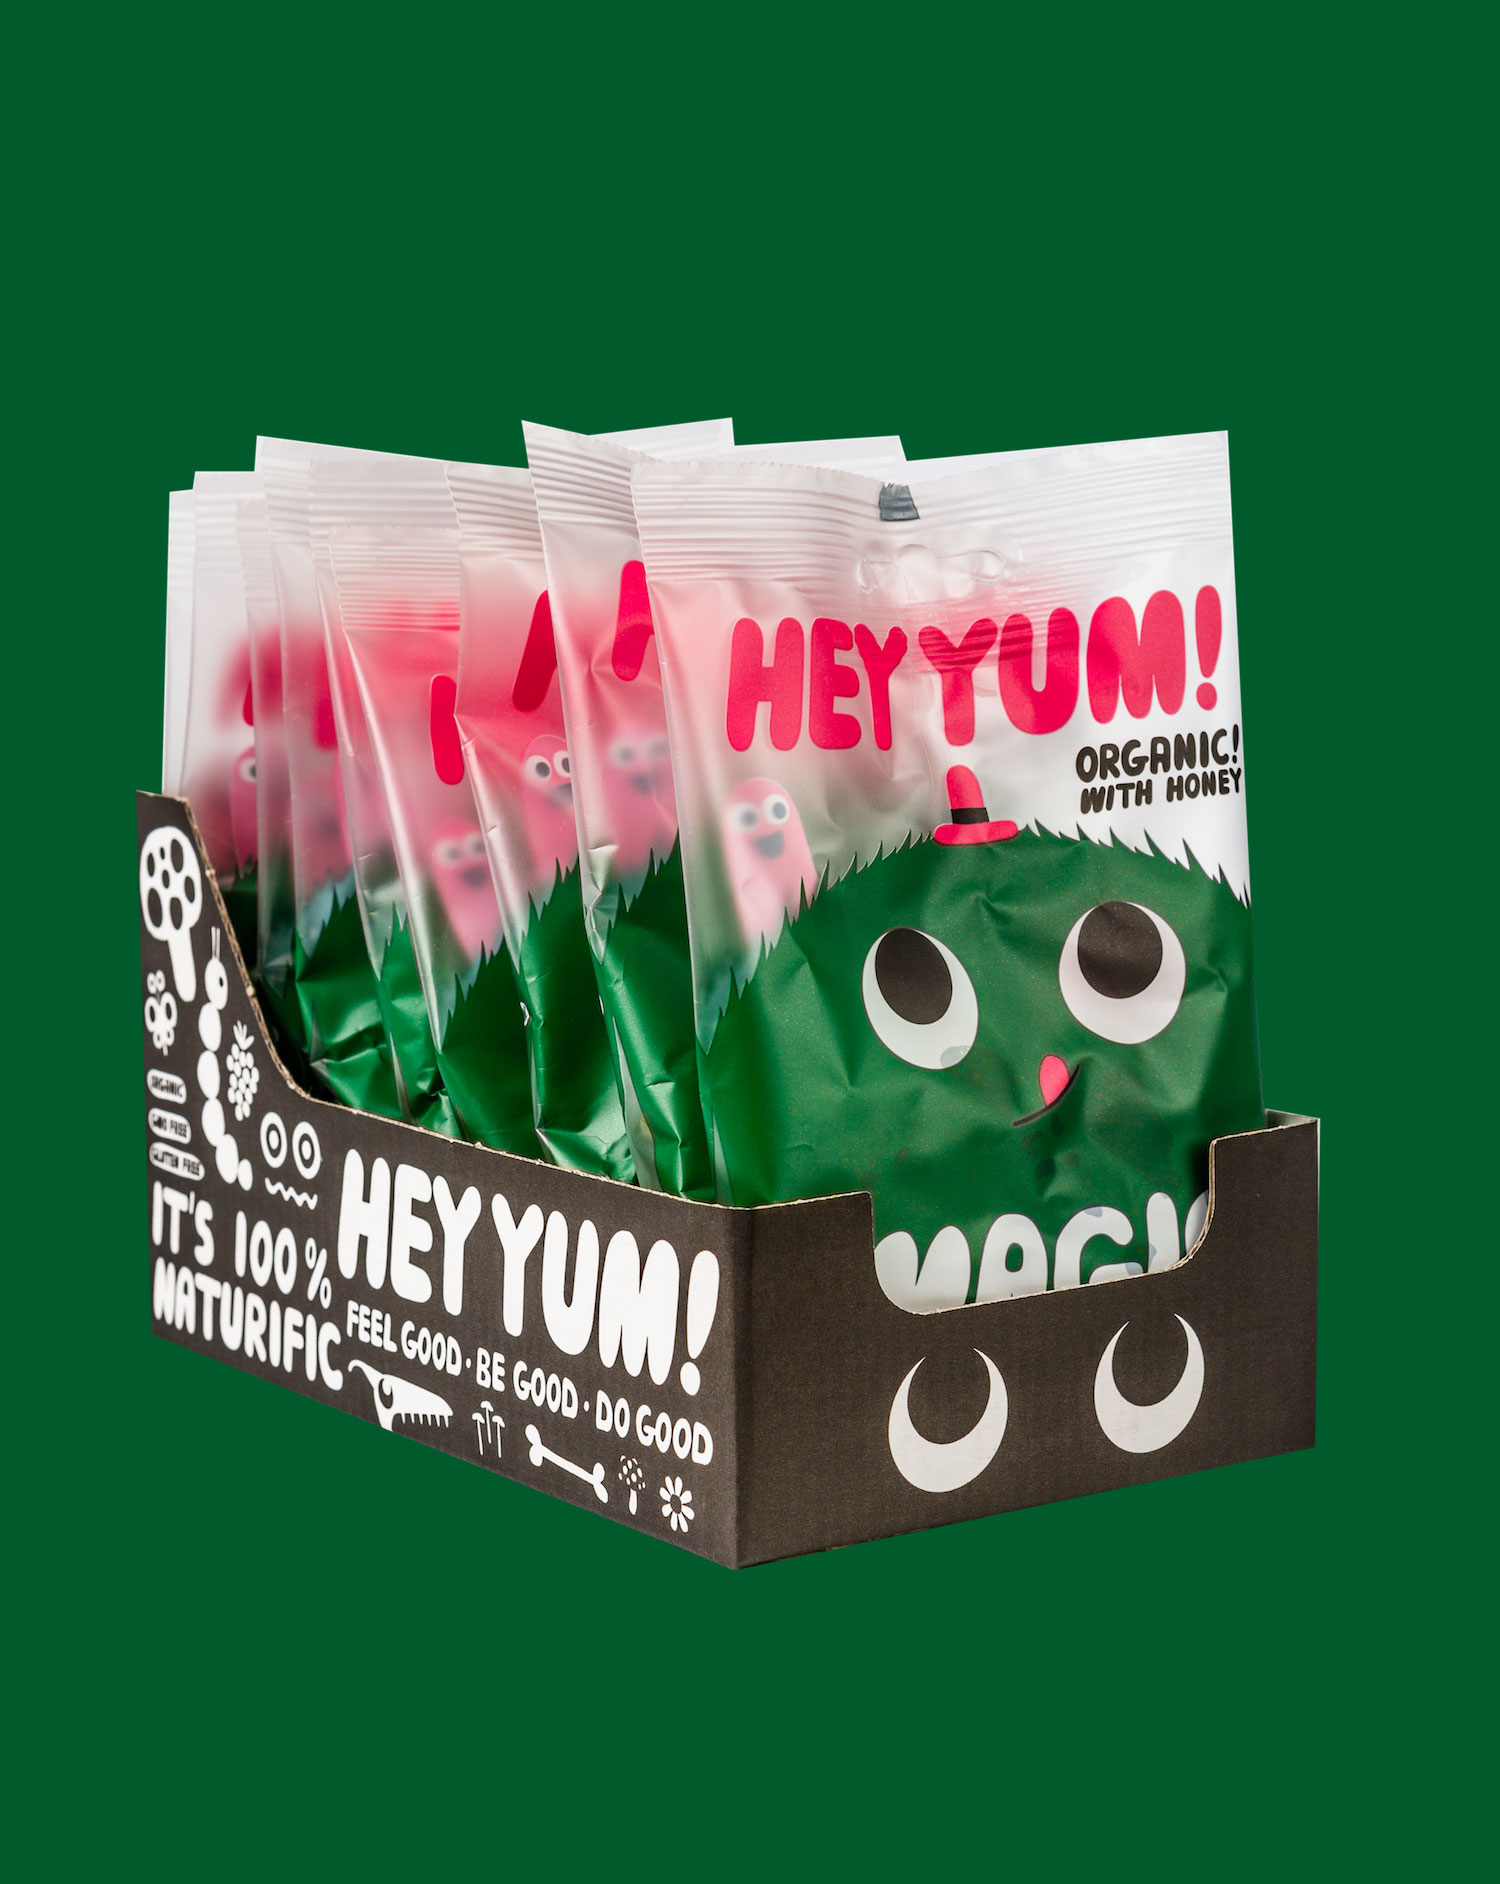 HEY YUM! – Yummilicious ORGANIC candy, infused with fruit and mixed with  love